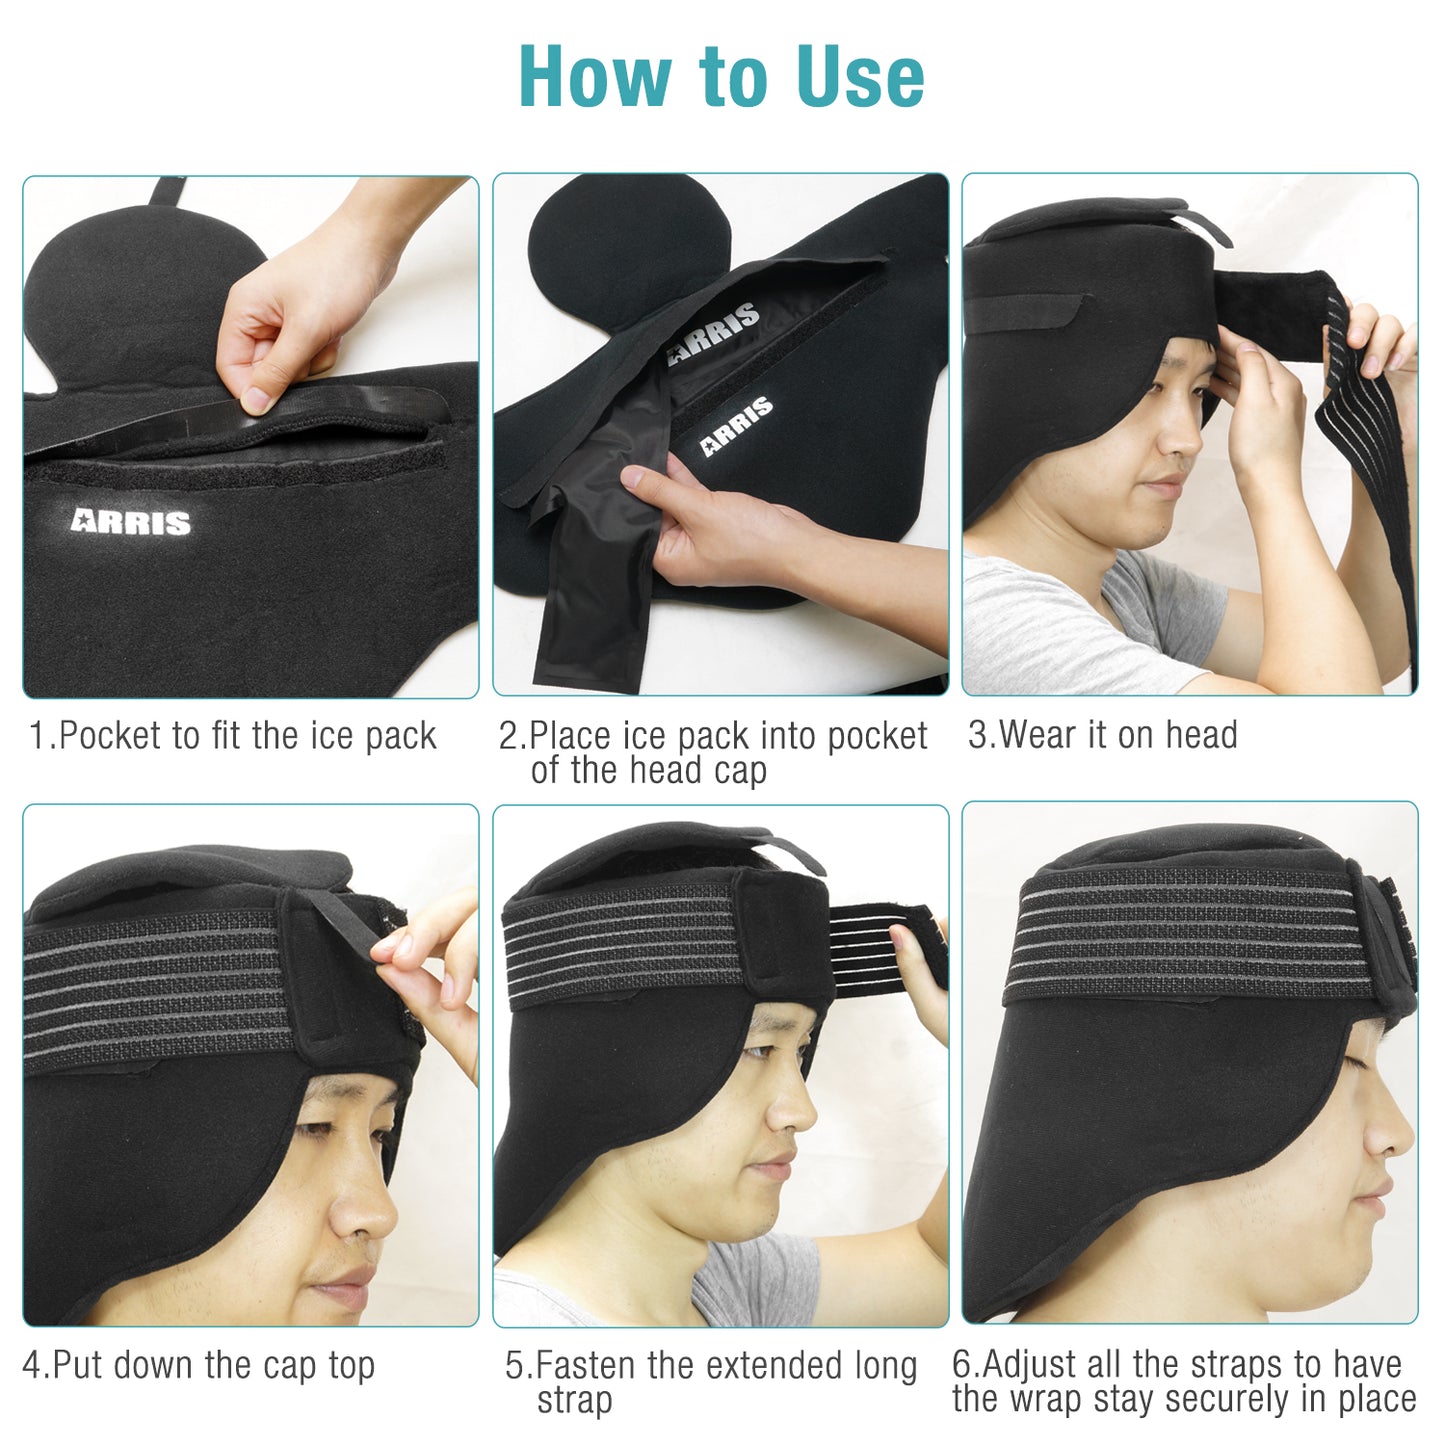 ARRIS Ice Cap for Headache and Migraine - Pain Relief Hat with Ice Pack for Migraine, Head and Neck Tension, Hot Cold Therapy Treatment